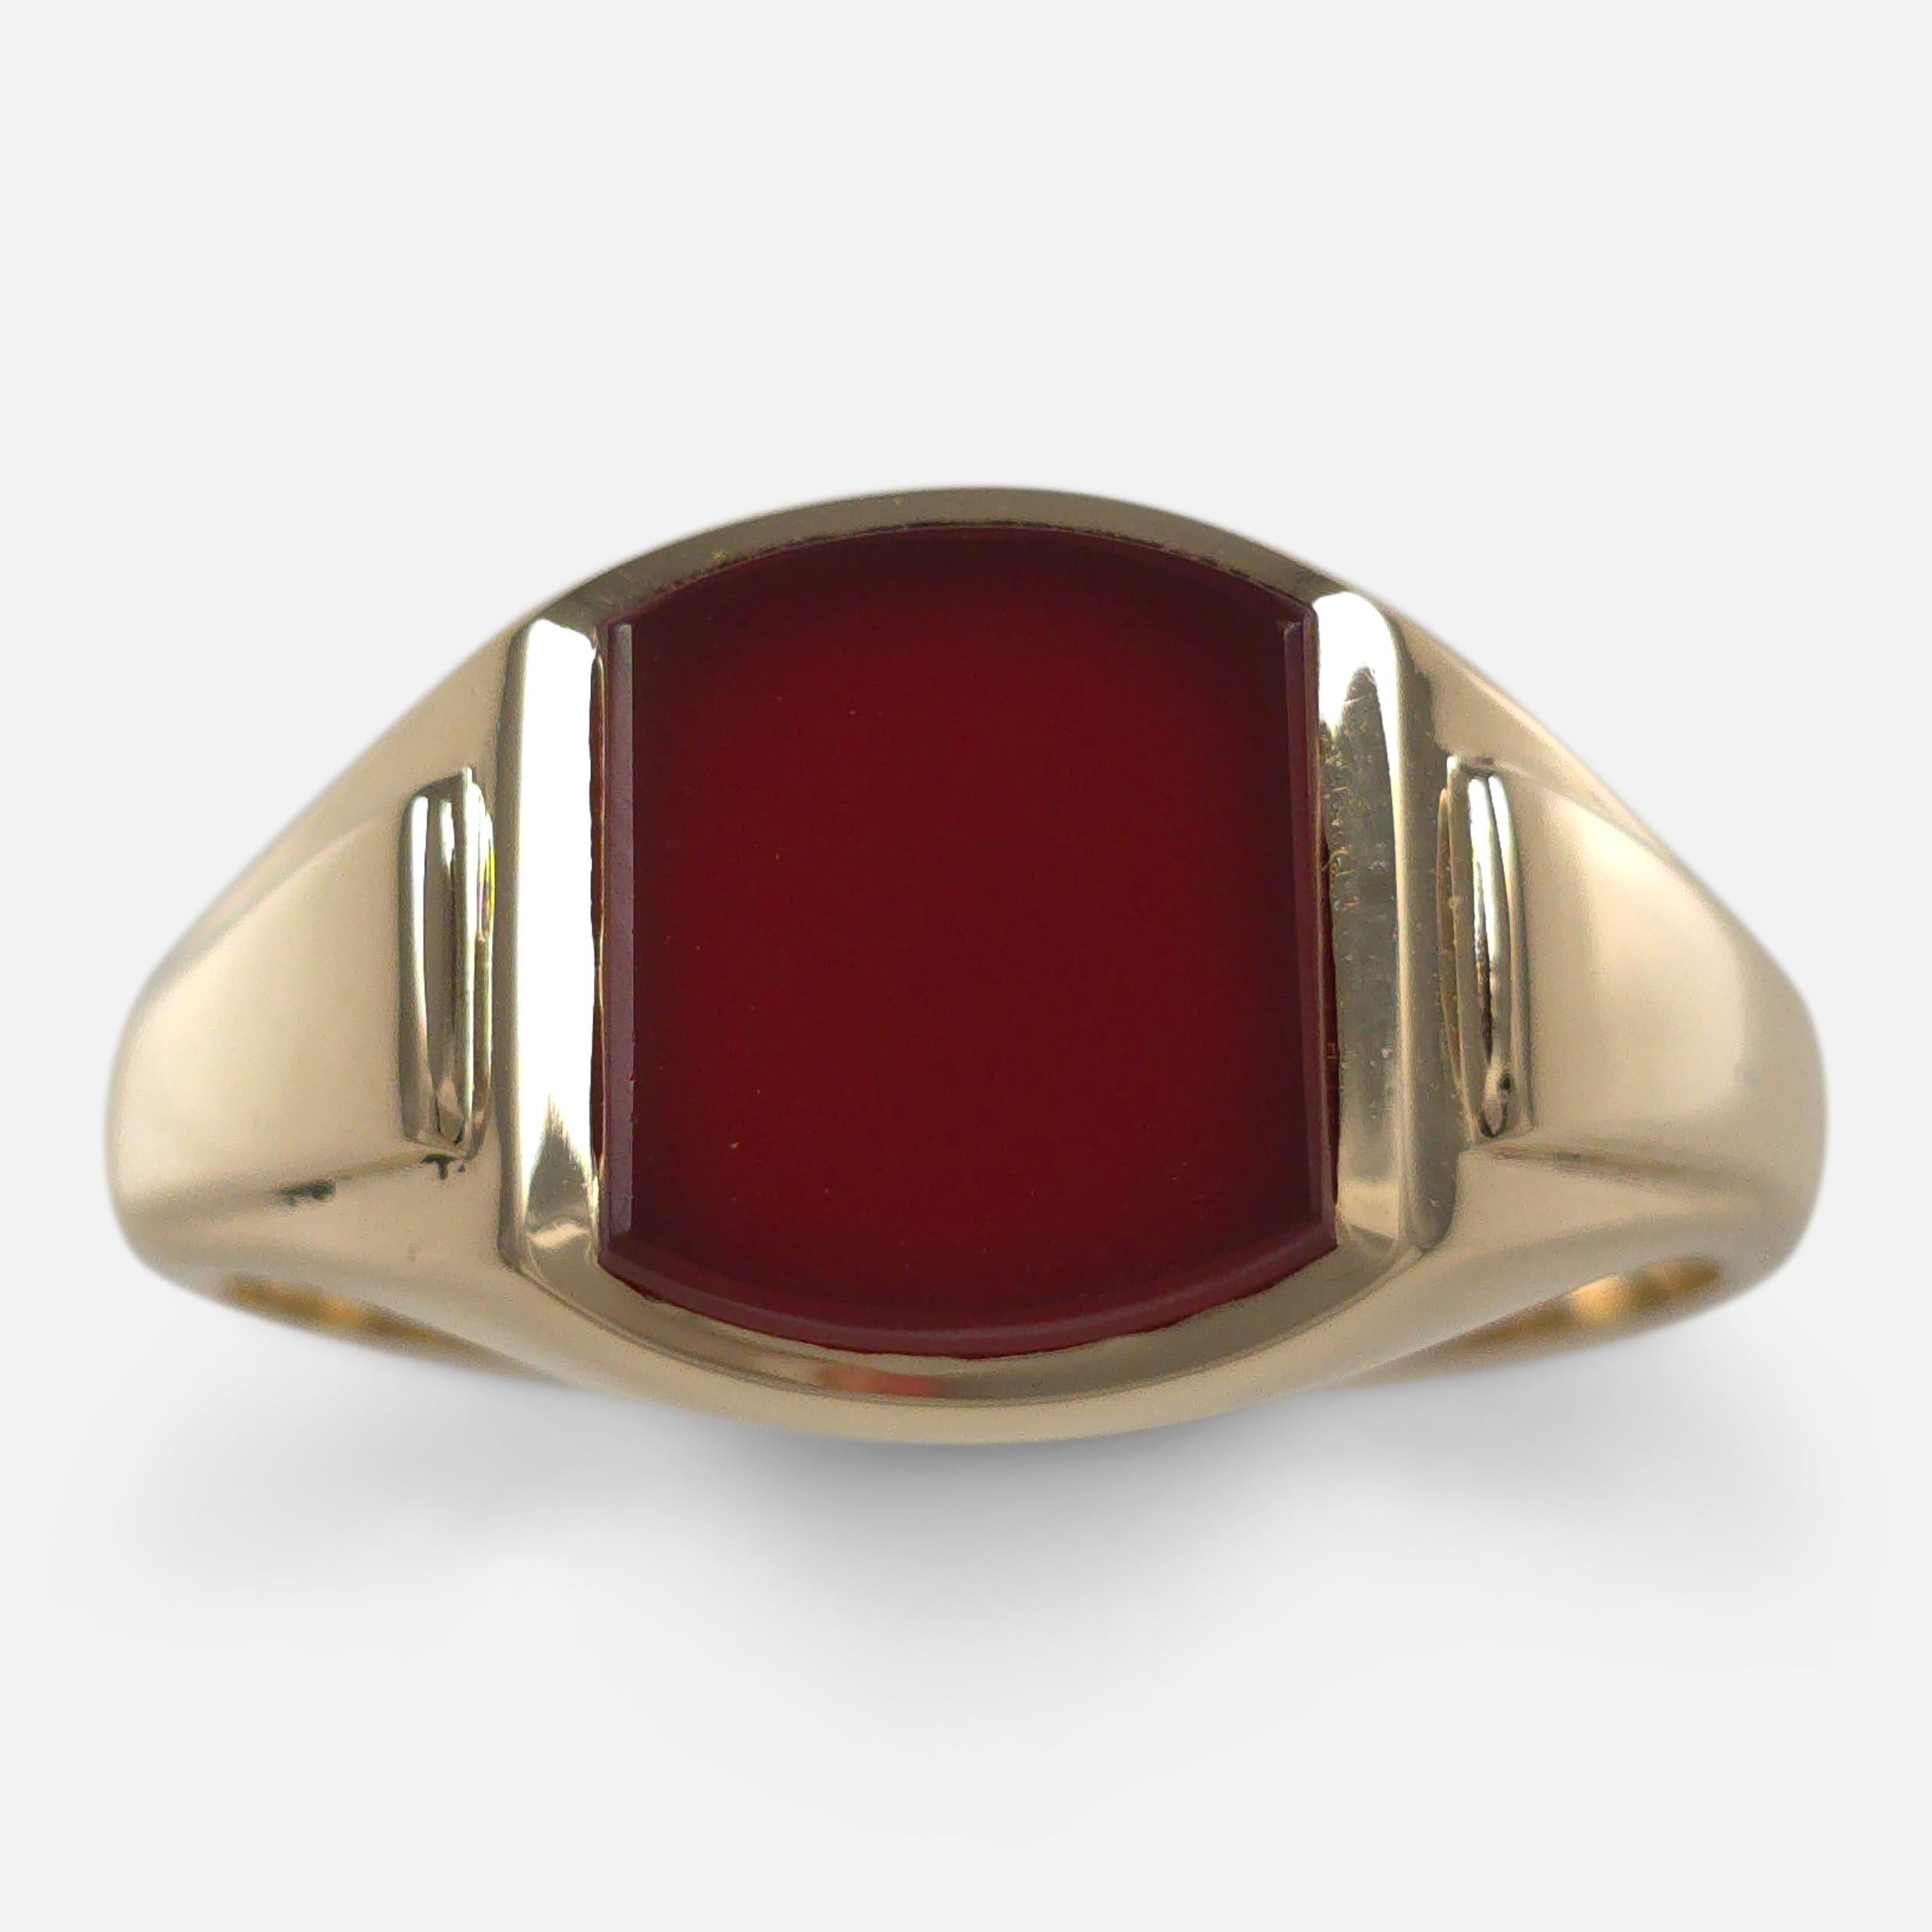 An 18ct yellow gold signet ring, unengraved, set with a carnelian. Hallmarked by the London assay office, marked '18' for 18 carat gold, with date letter 'C' for 1958.

• Period: Mid 20th Century
• Maker: W Wilkinson Ltd
• Measurement: UK ring size